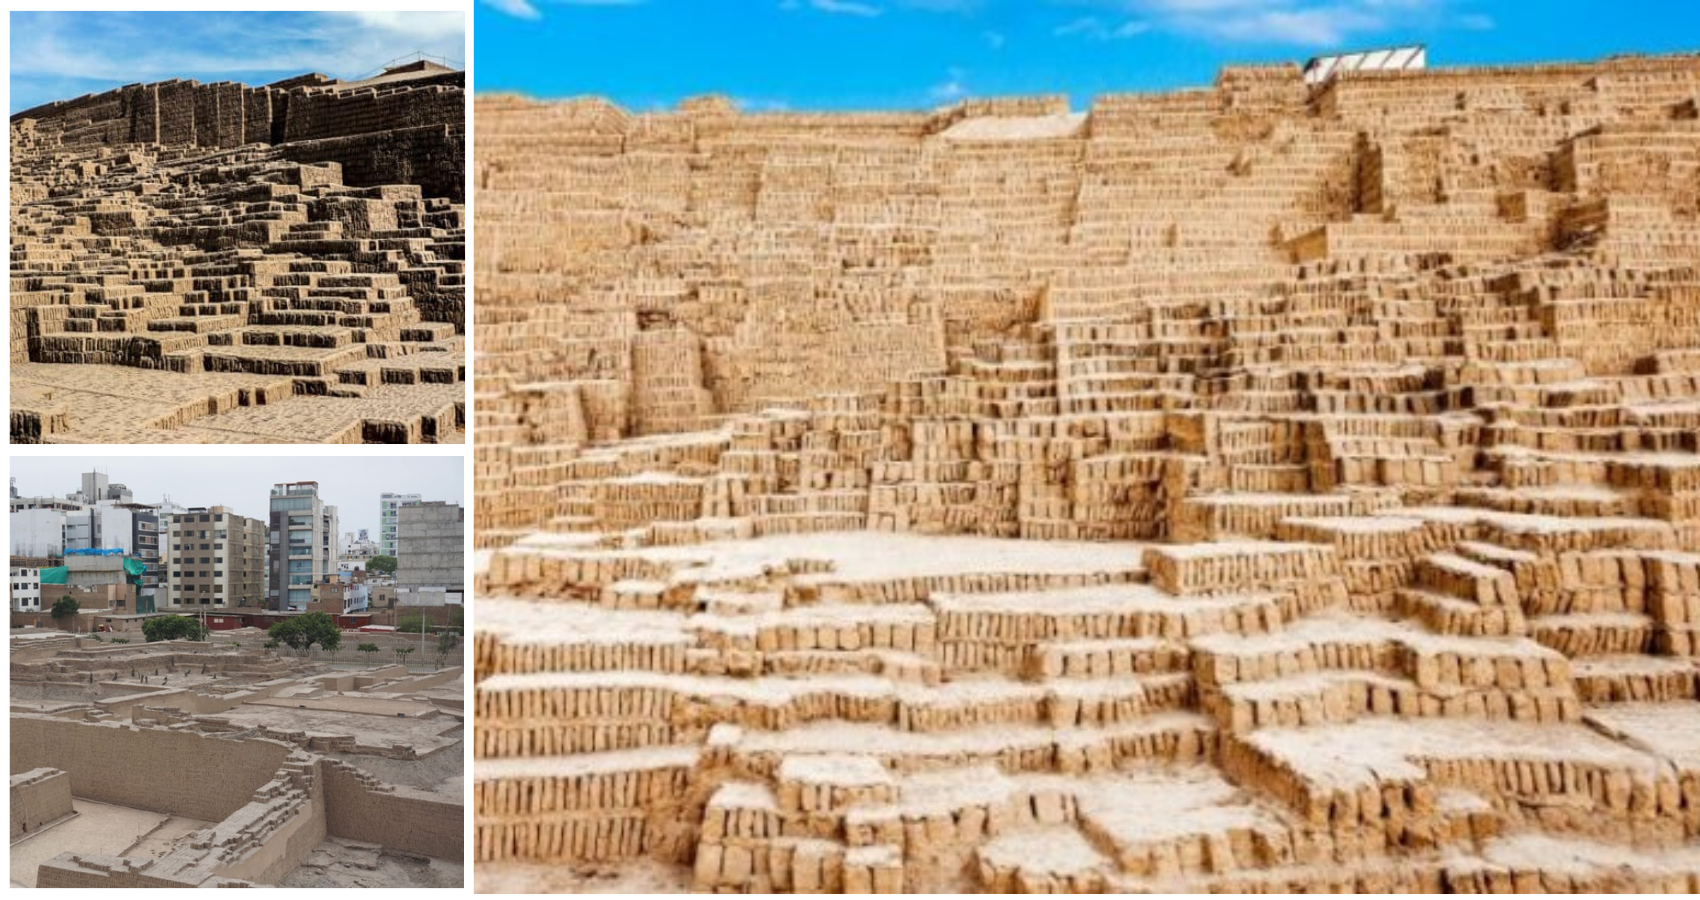 The Huaca Pucllana: A Massive Ancient Pyramid You Probably Never Knew Existed